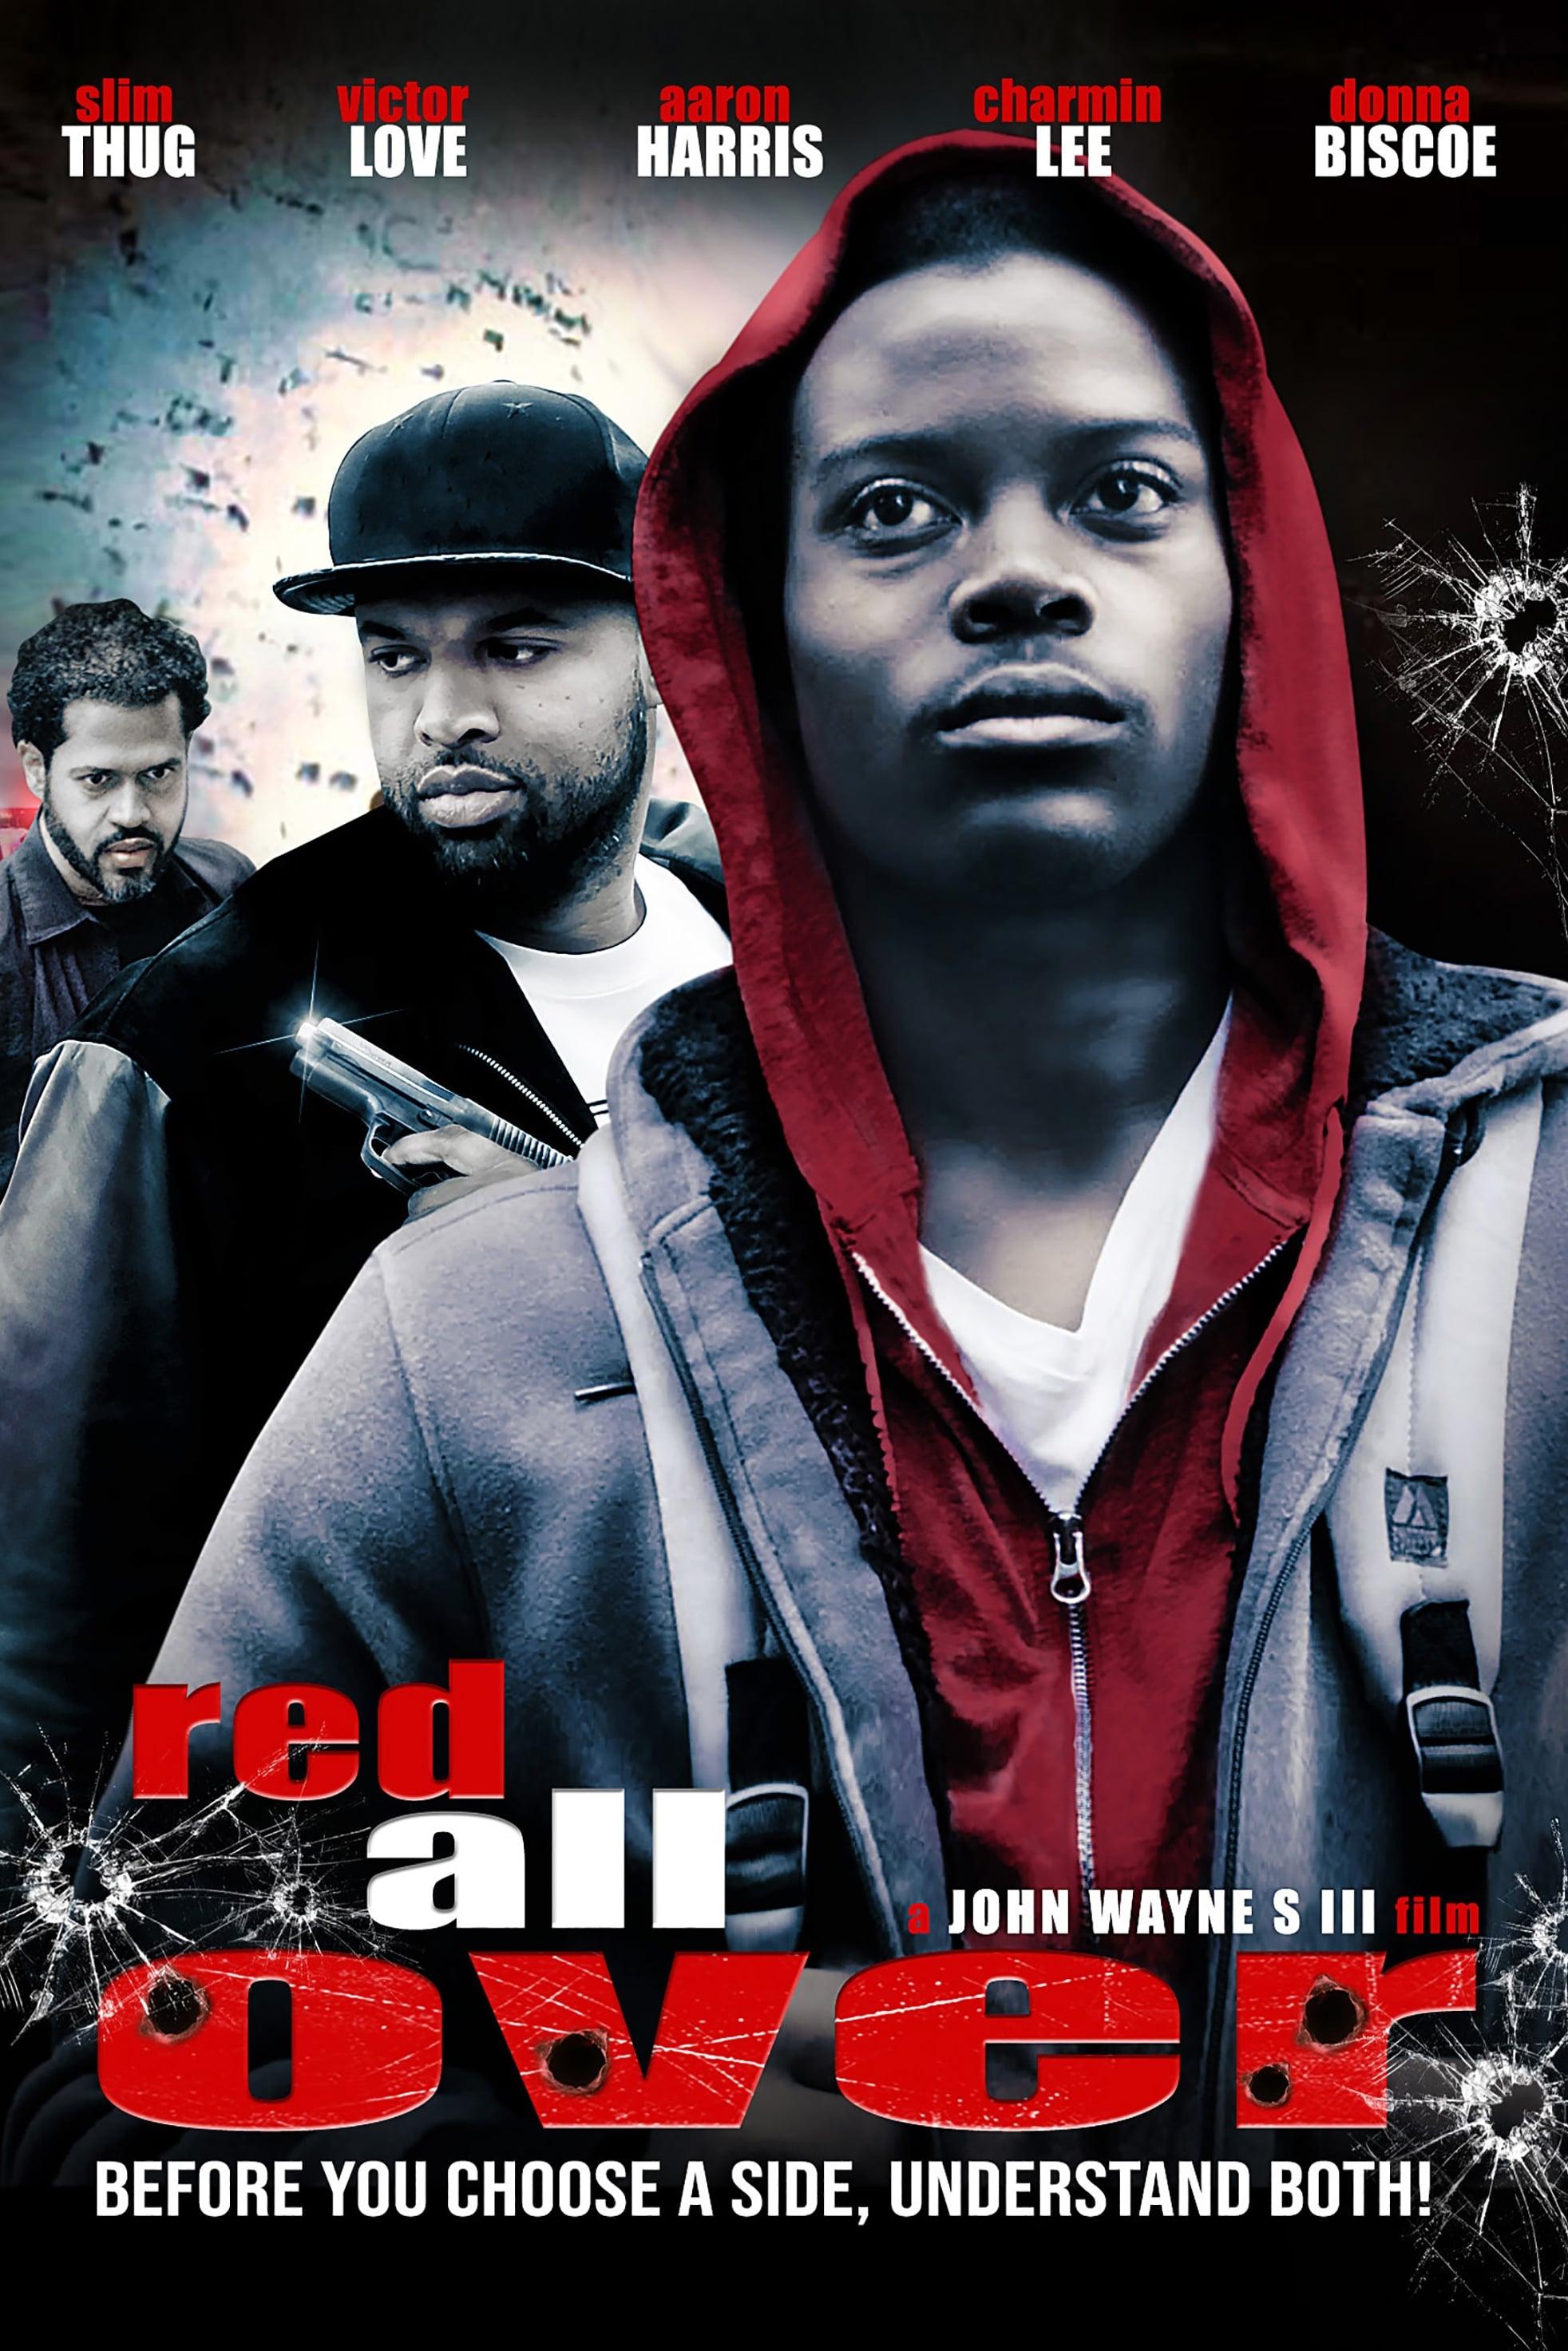 Red All Over poster